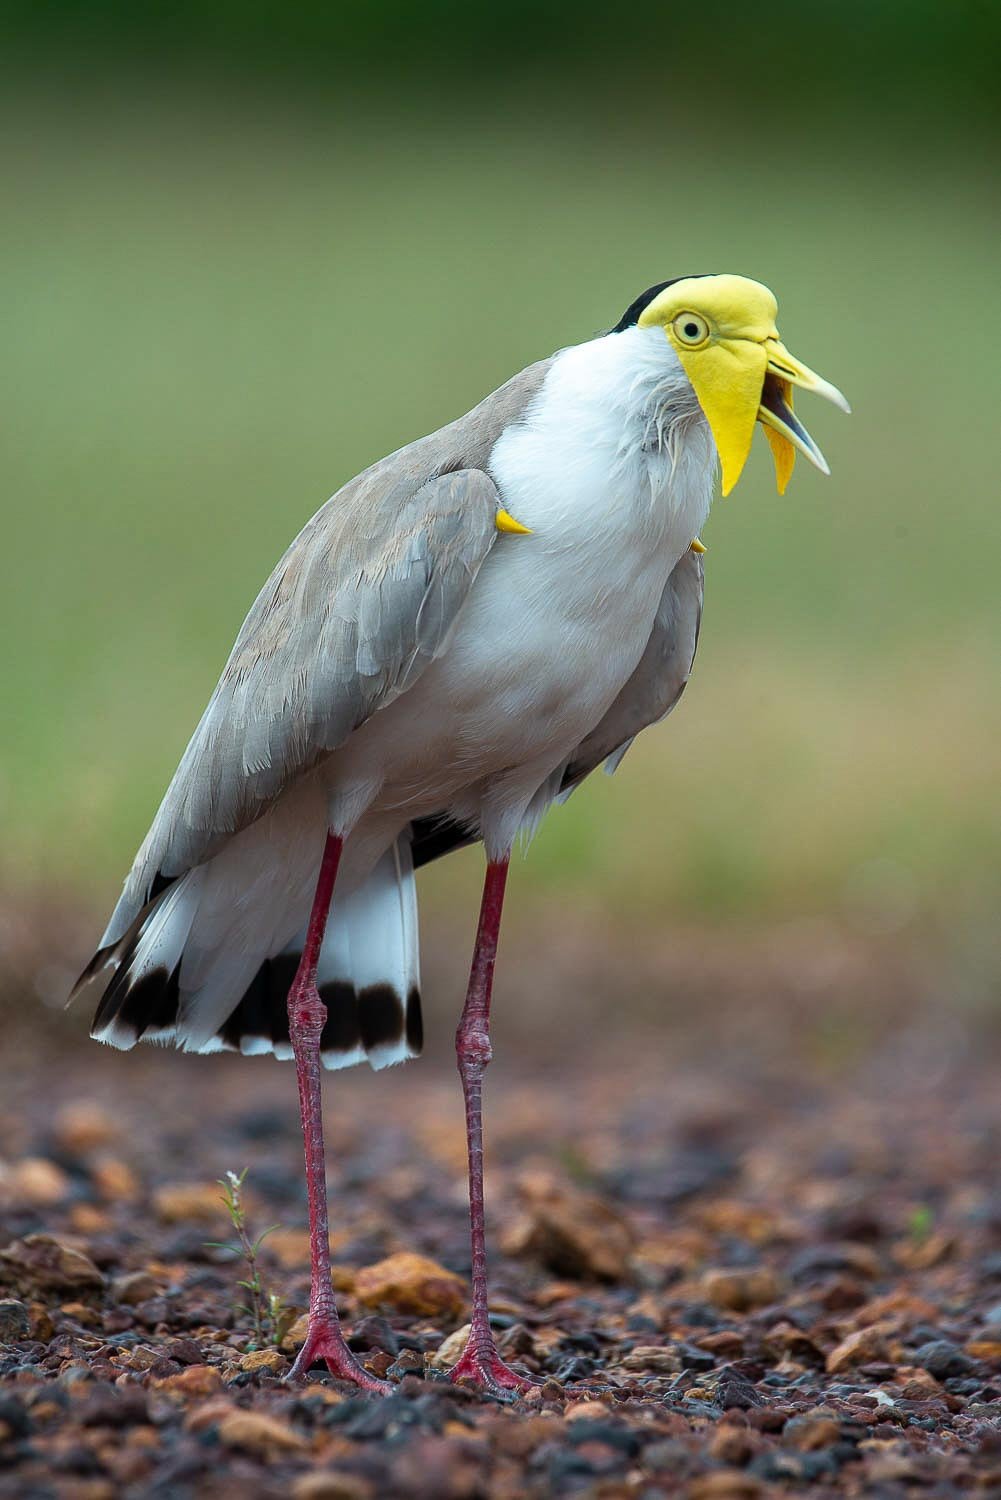 A close-up shot of a Heron-like bird with long thin legs and a yellow-colored head area, Arnhem Land 25 - Northern Territory 